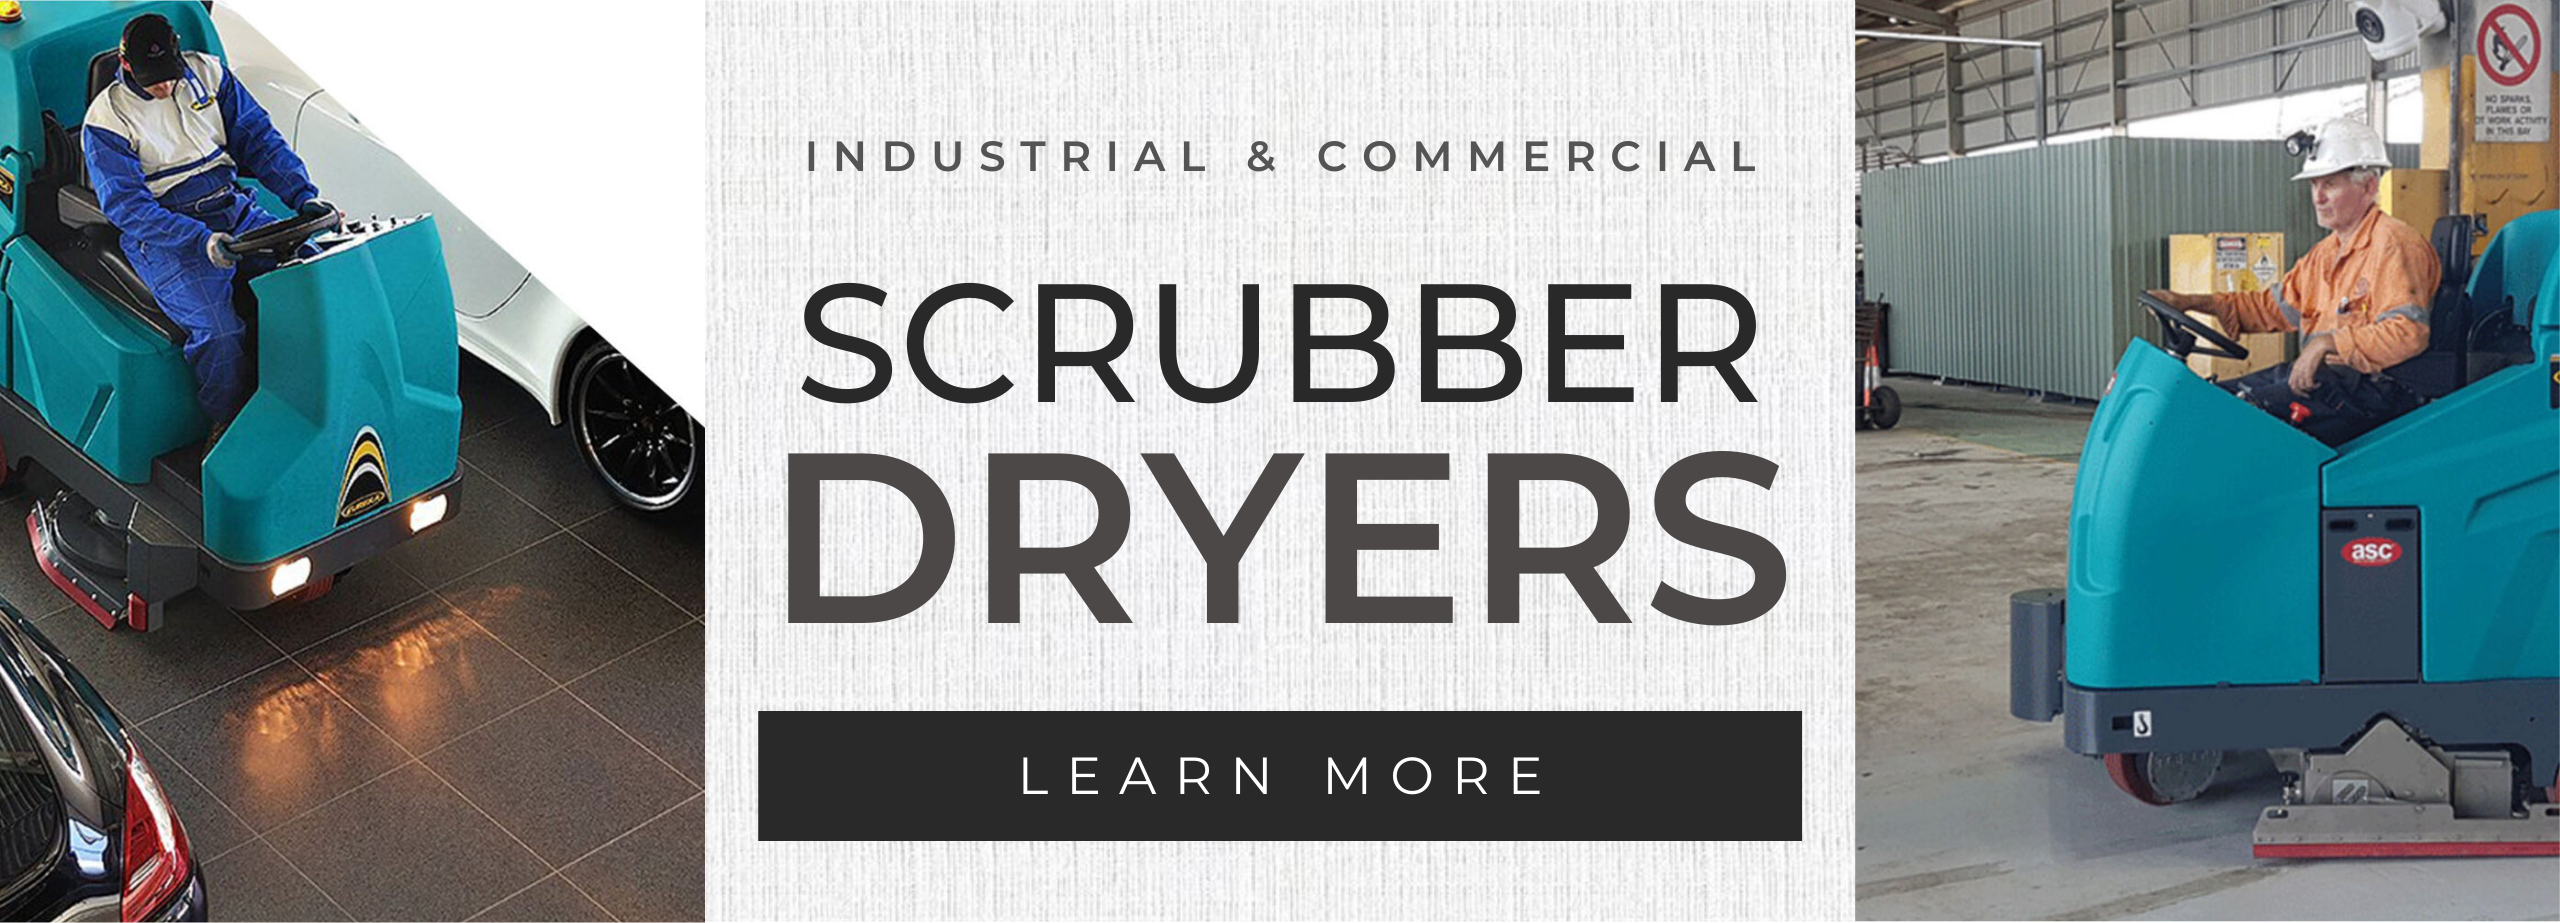 banner for lio international collection of scrubber dryers for industrial and commercial facilities